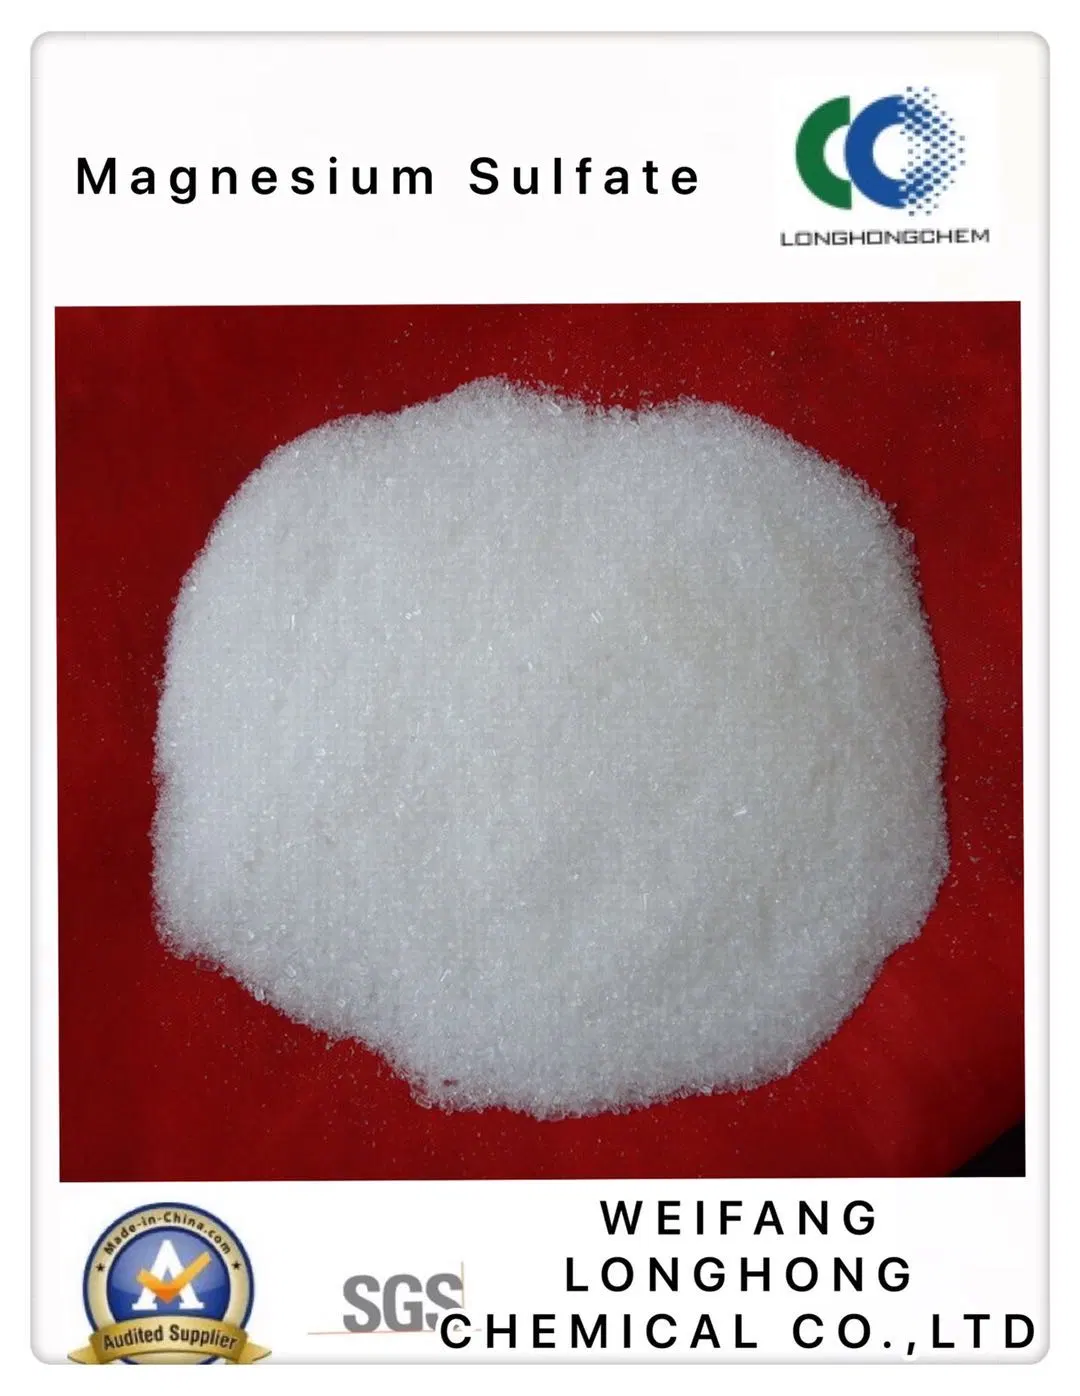 Industrial Grade 99% Magnesium Sulfate Heptahydrate Used as a Magnesium Fertilizer in Agriculture CAS 10034-99-8